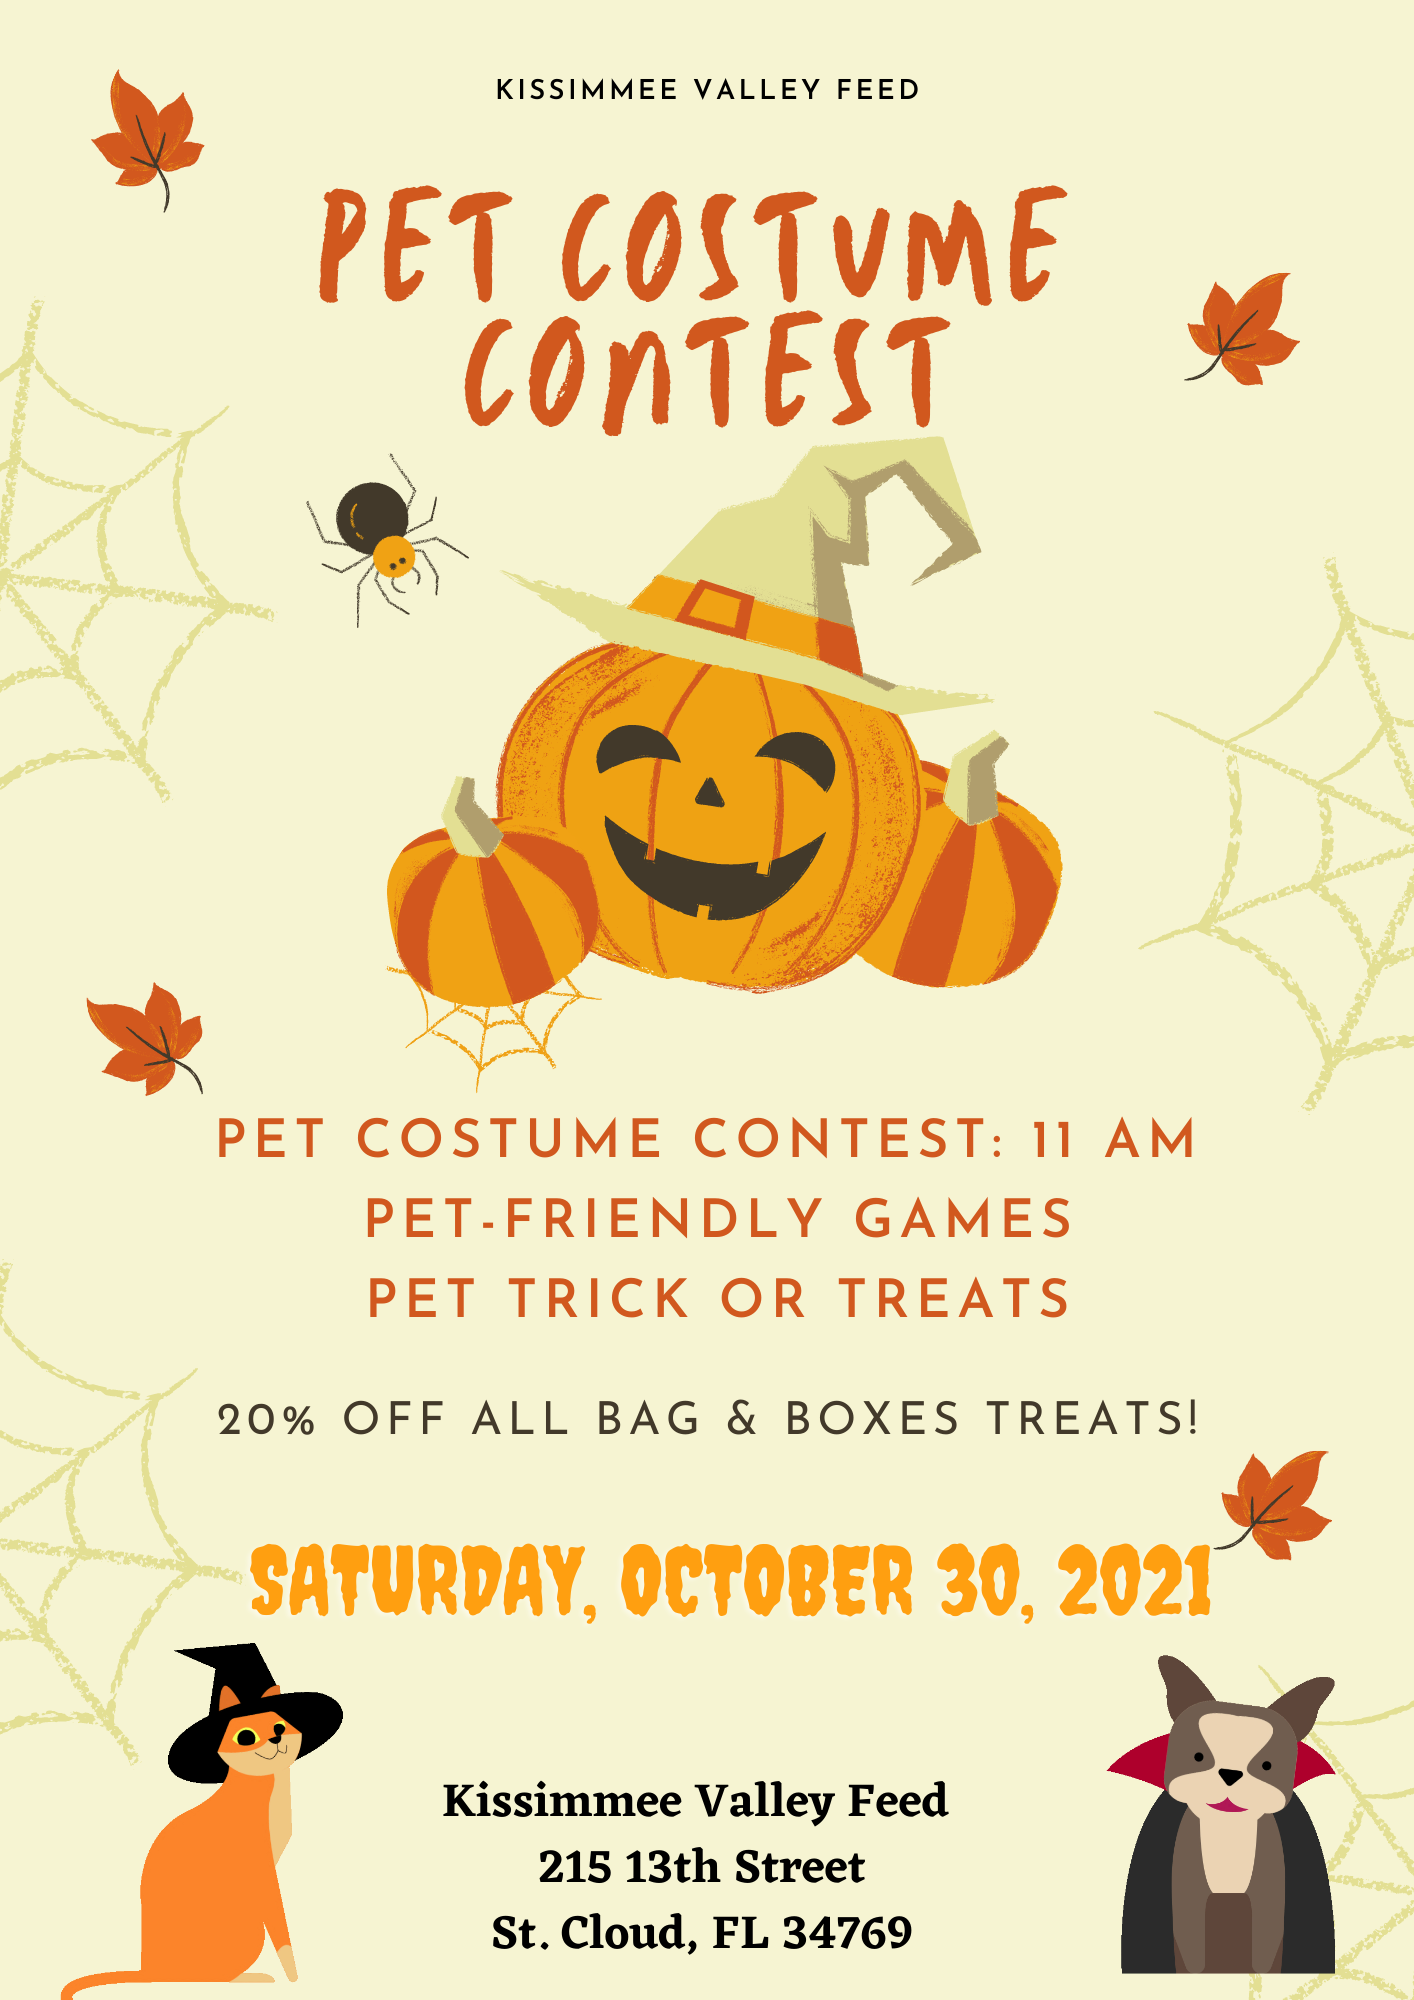 Pet Costume Contest - Kissimmee Valley Feed